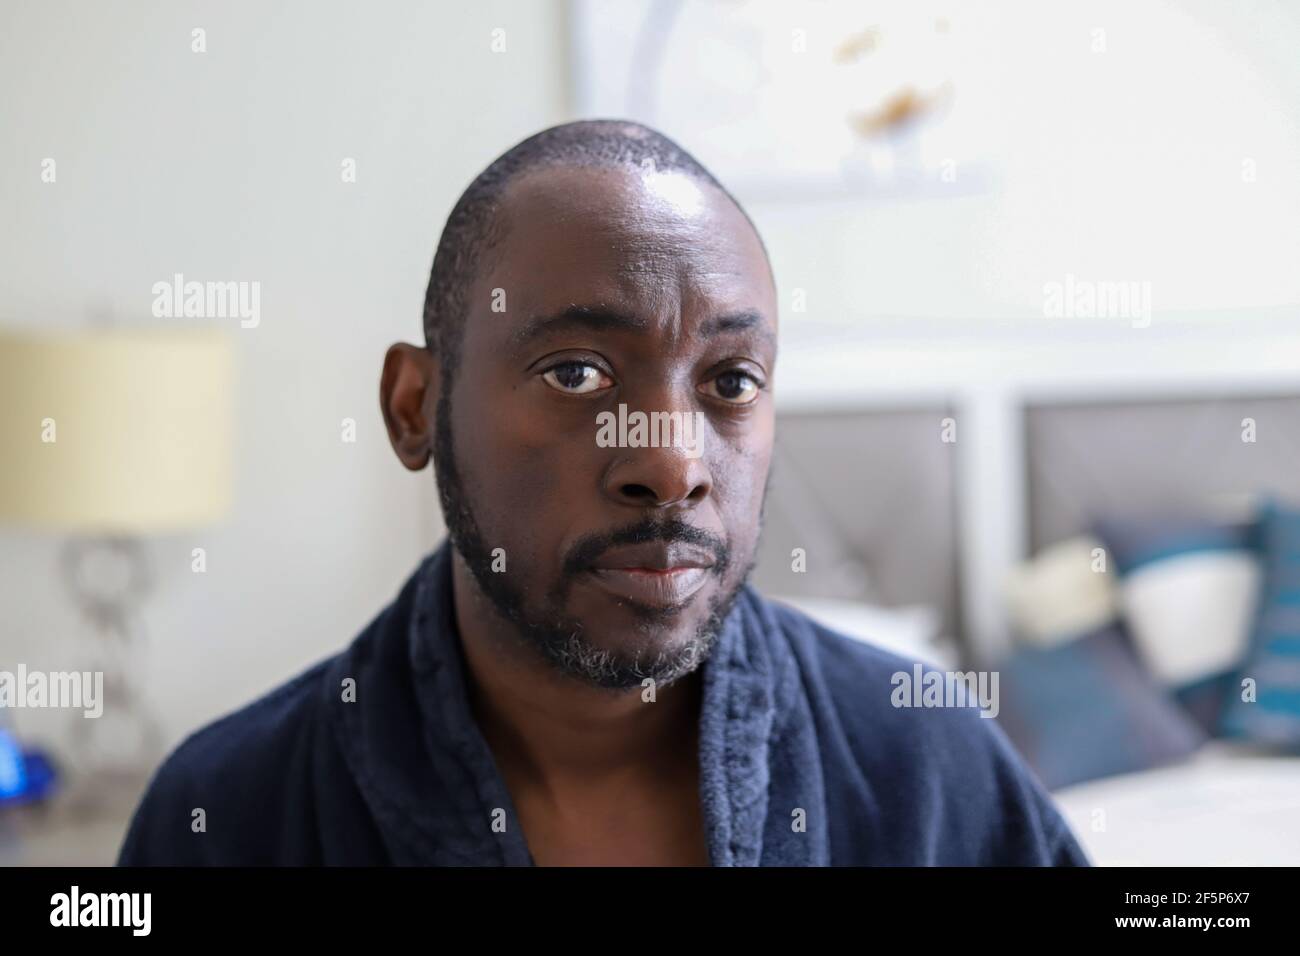 A portrait of a African-American man sitting on a bed and looking sad and depressed Stock Photo